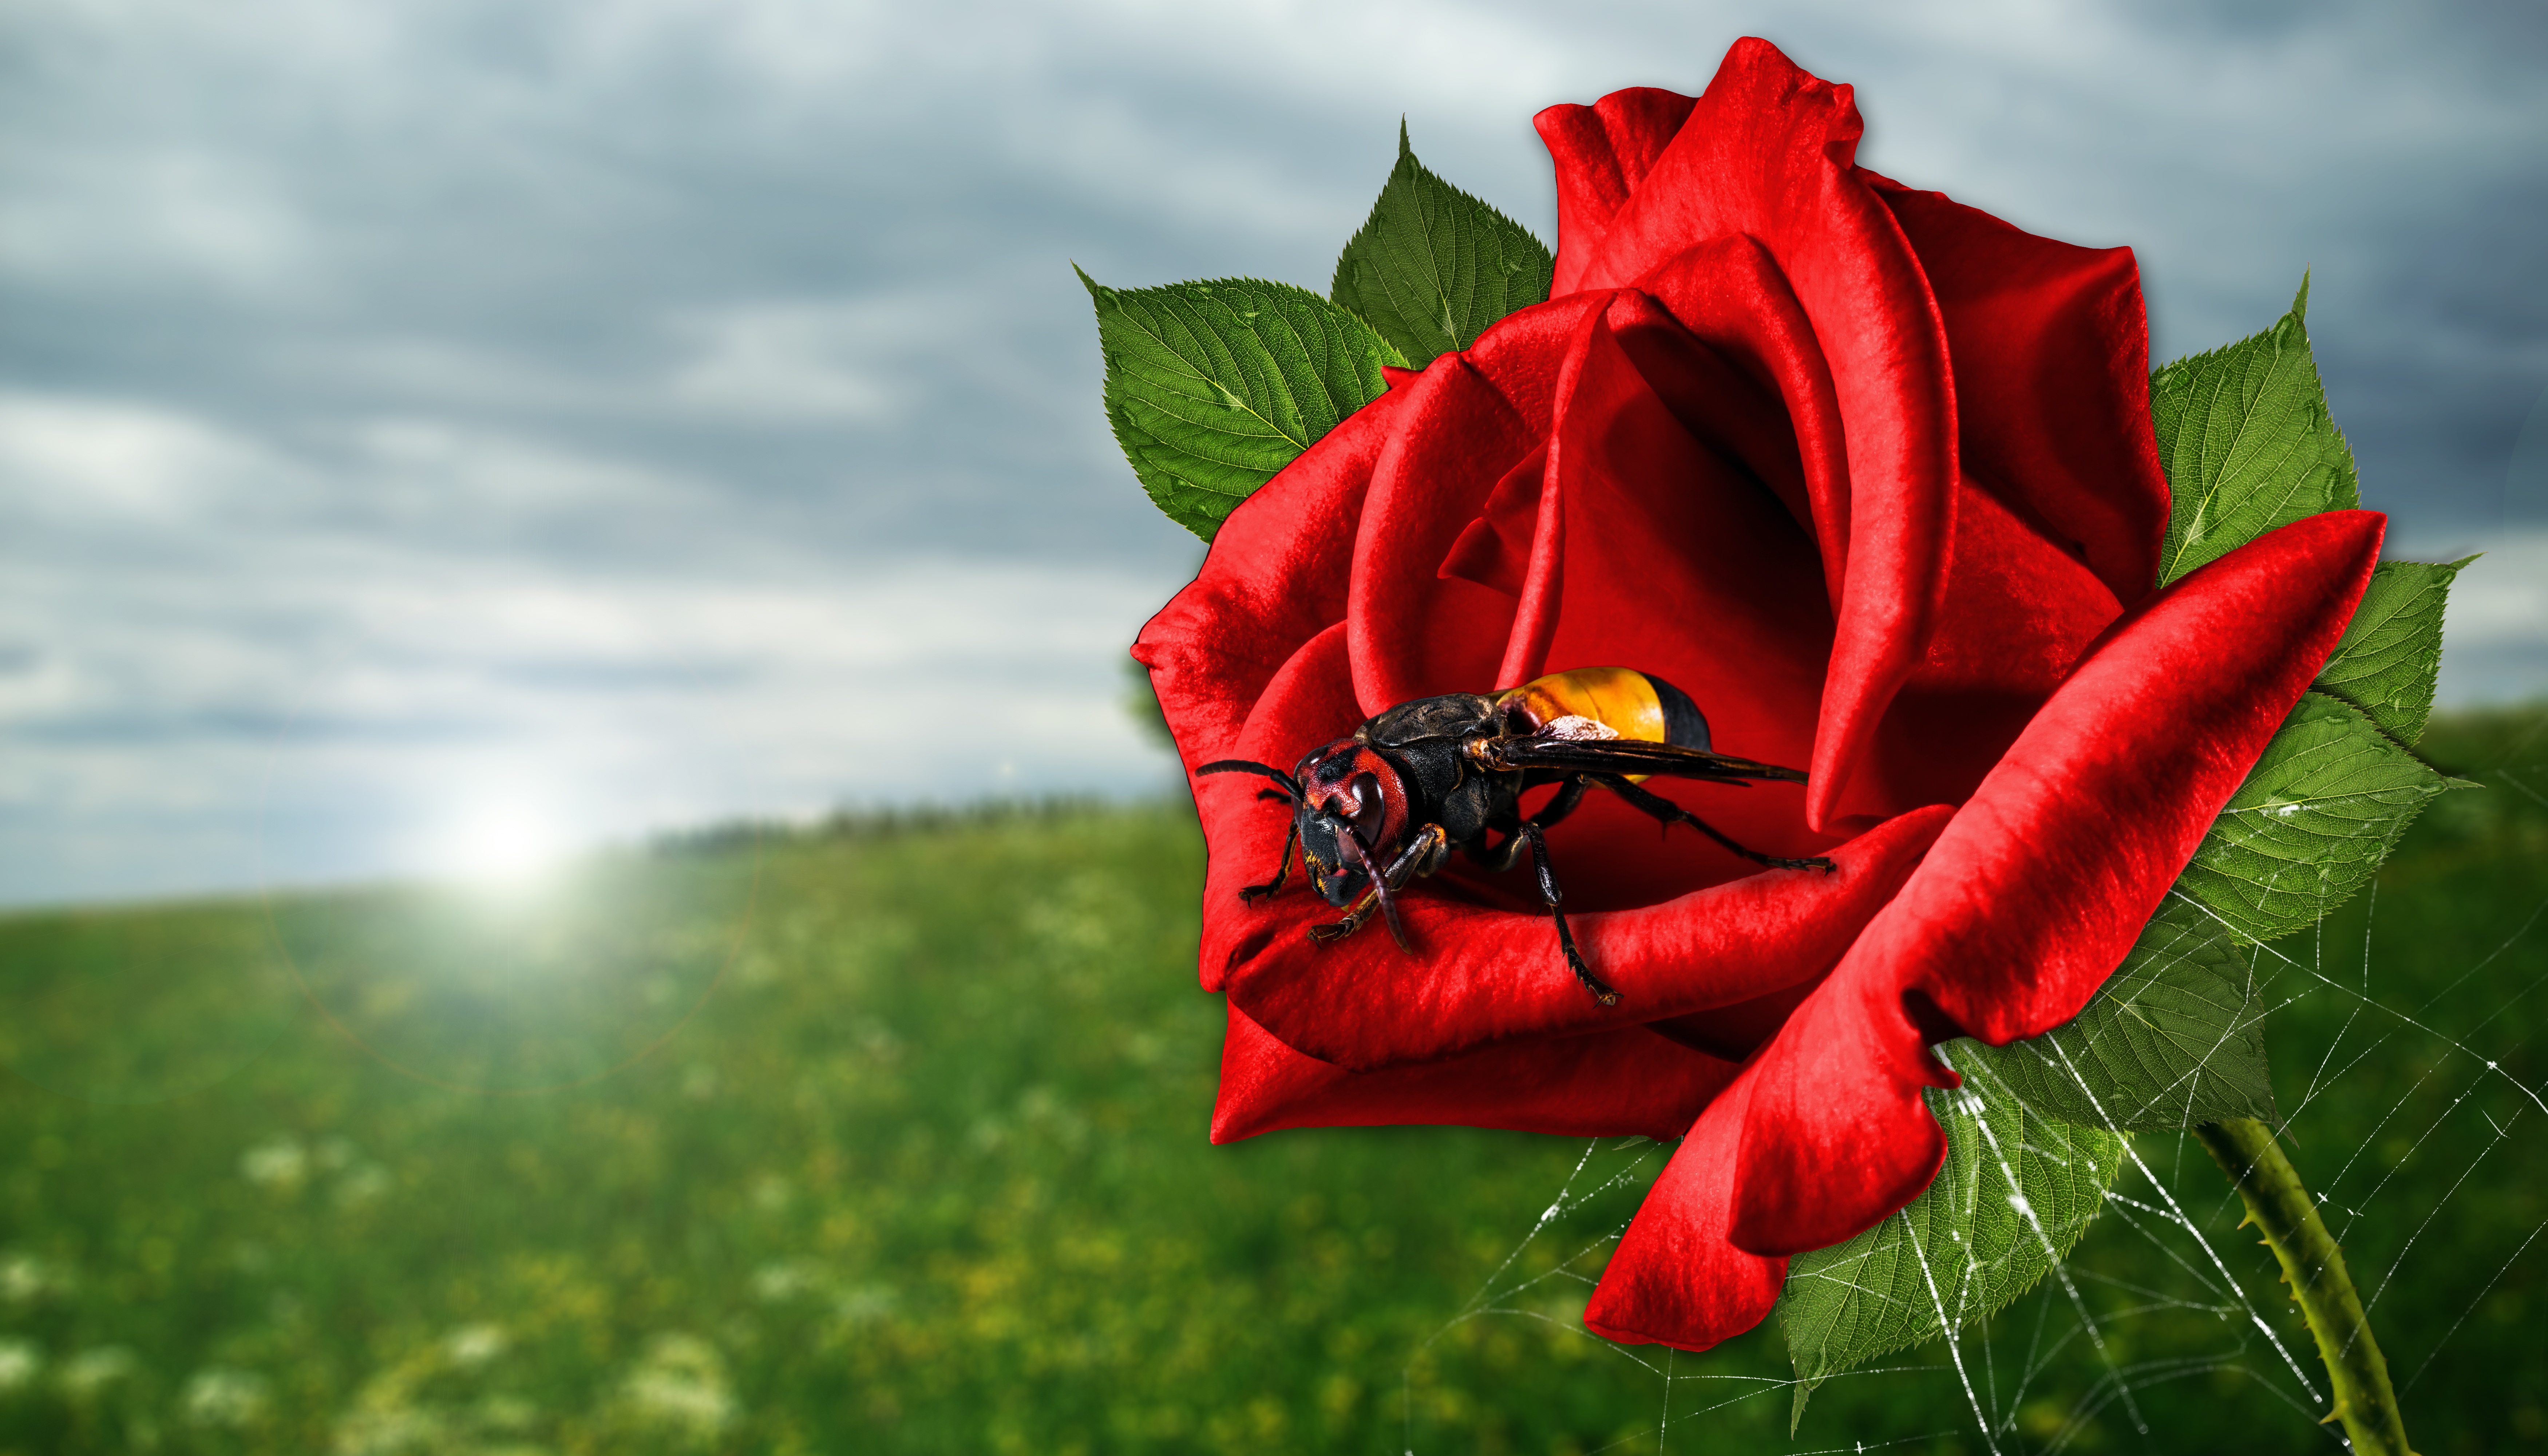 Fly on the rose photo